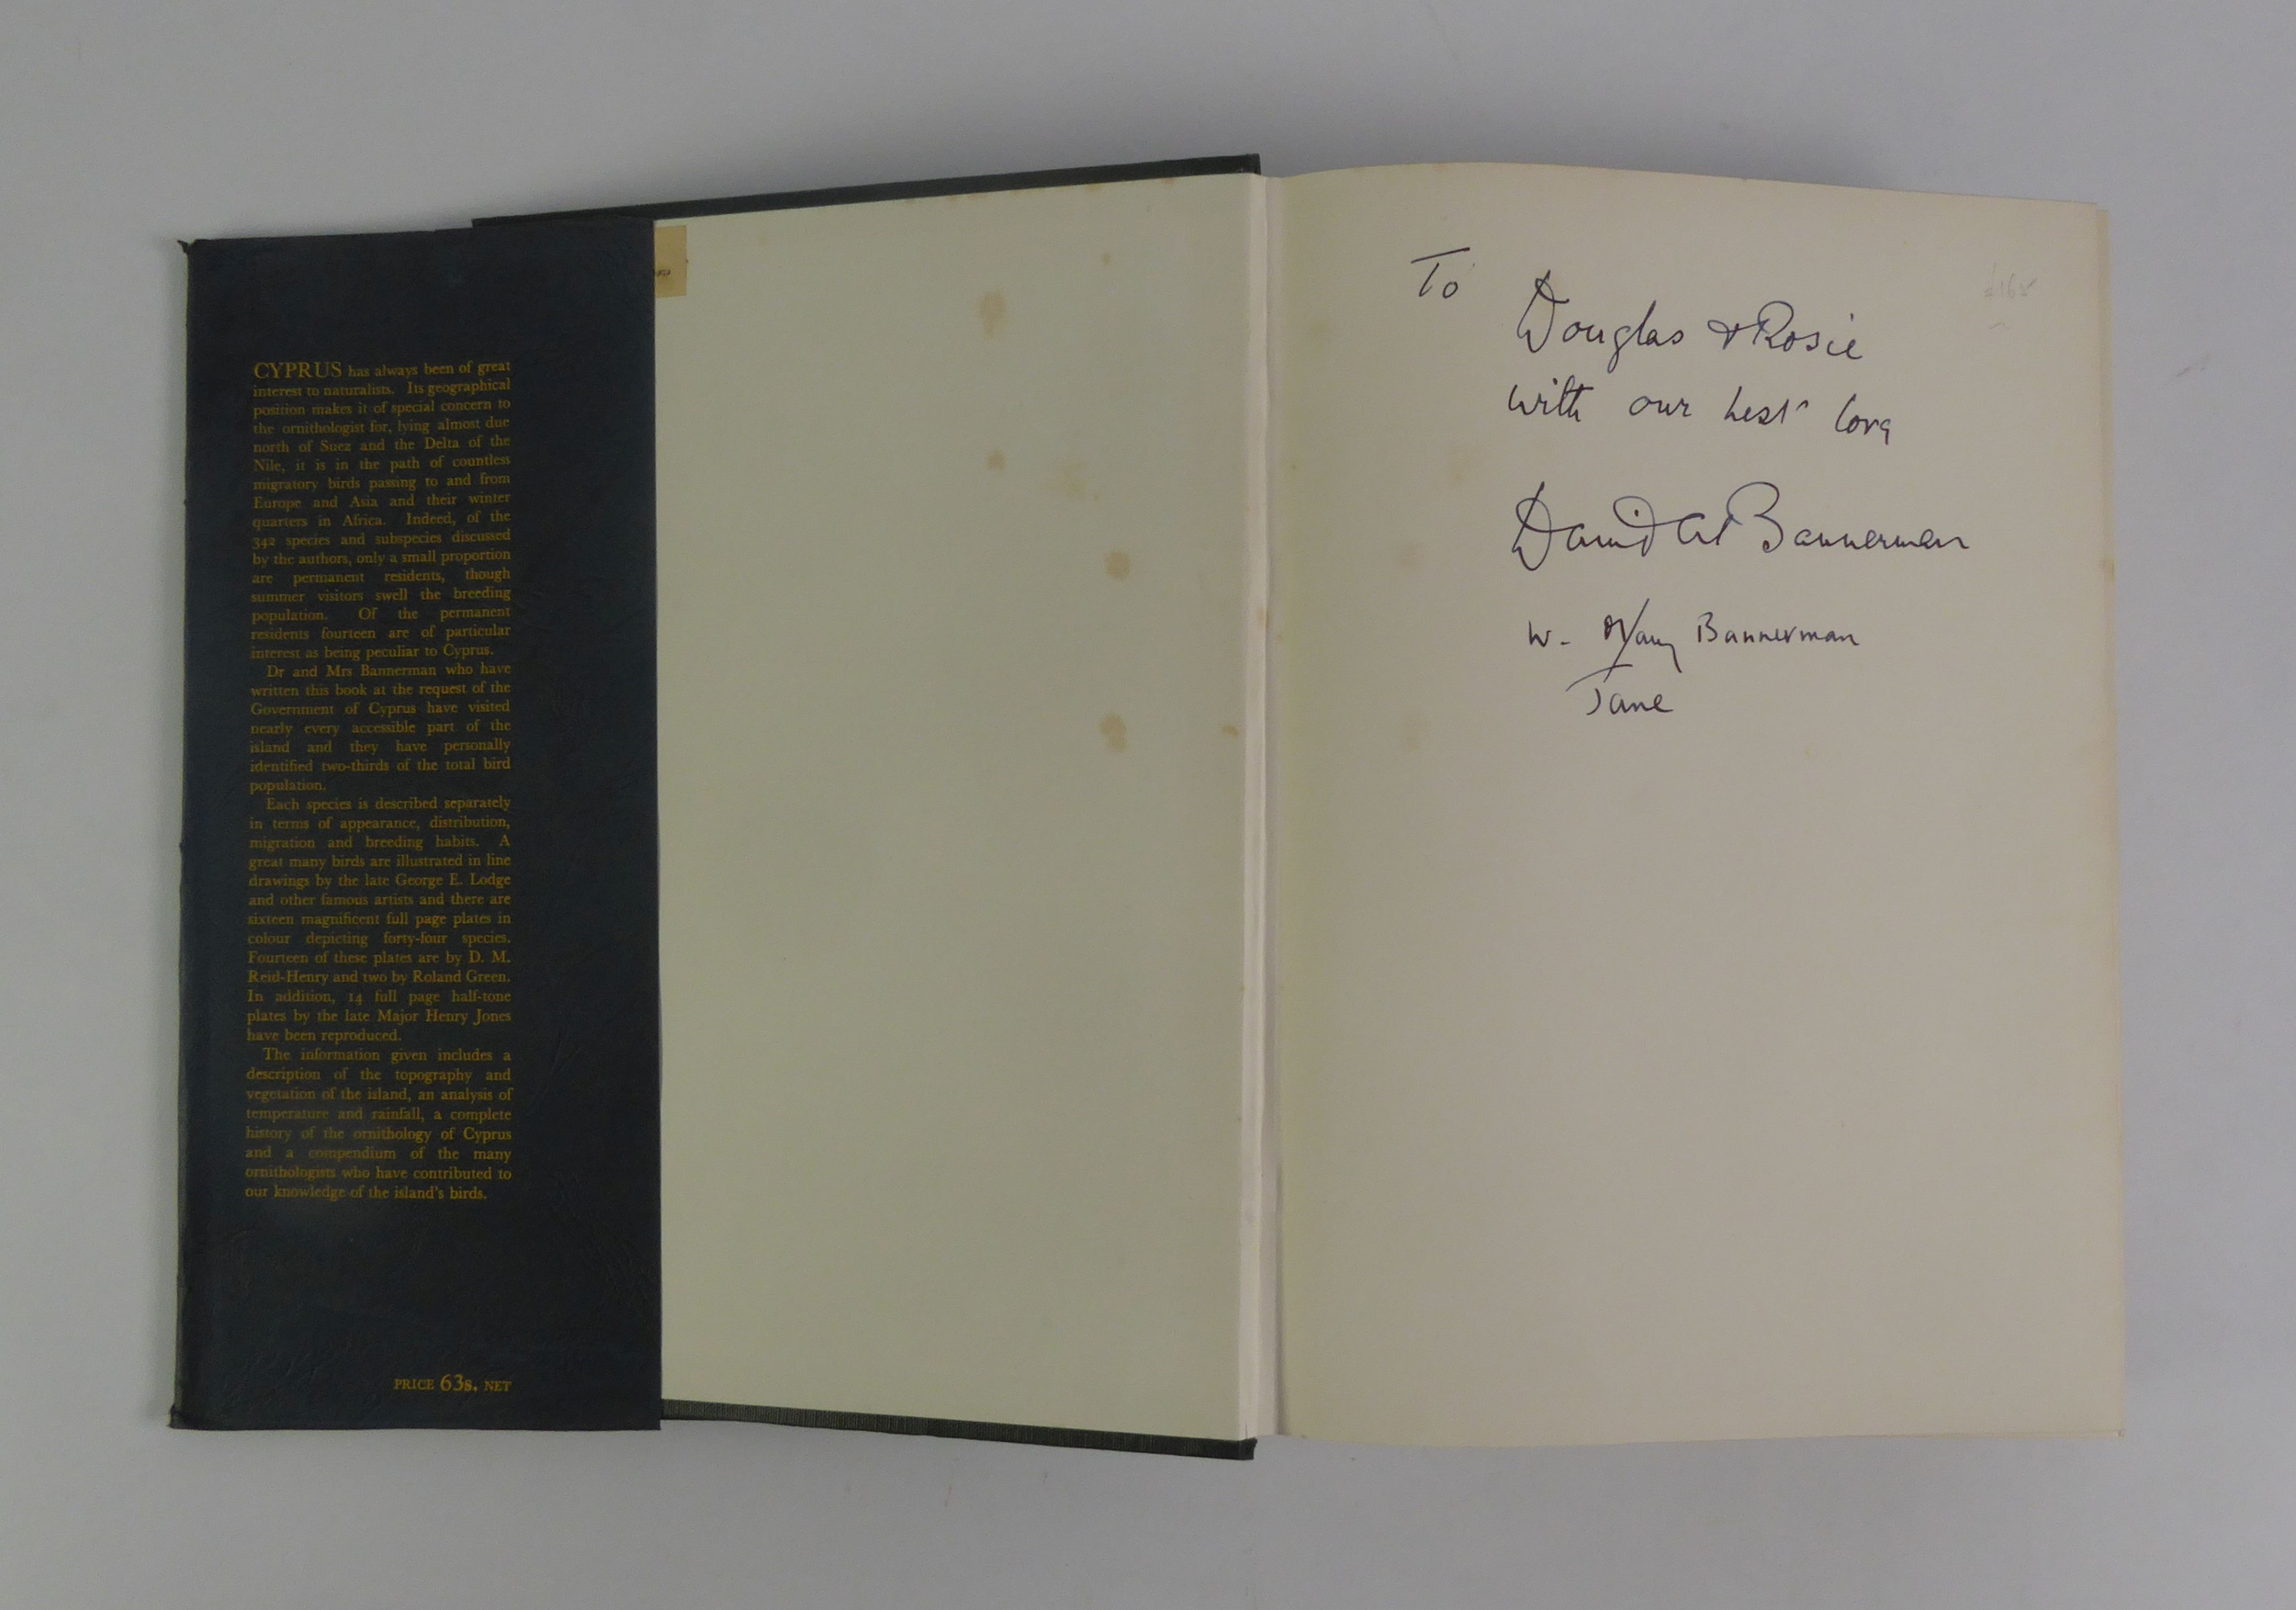 Bannerman - Birds of Cyprus, pub Oliver & Boyd, first ed 1958, with dj, priced 63s net. This copy - Image 2 of 2